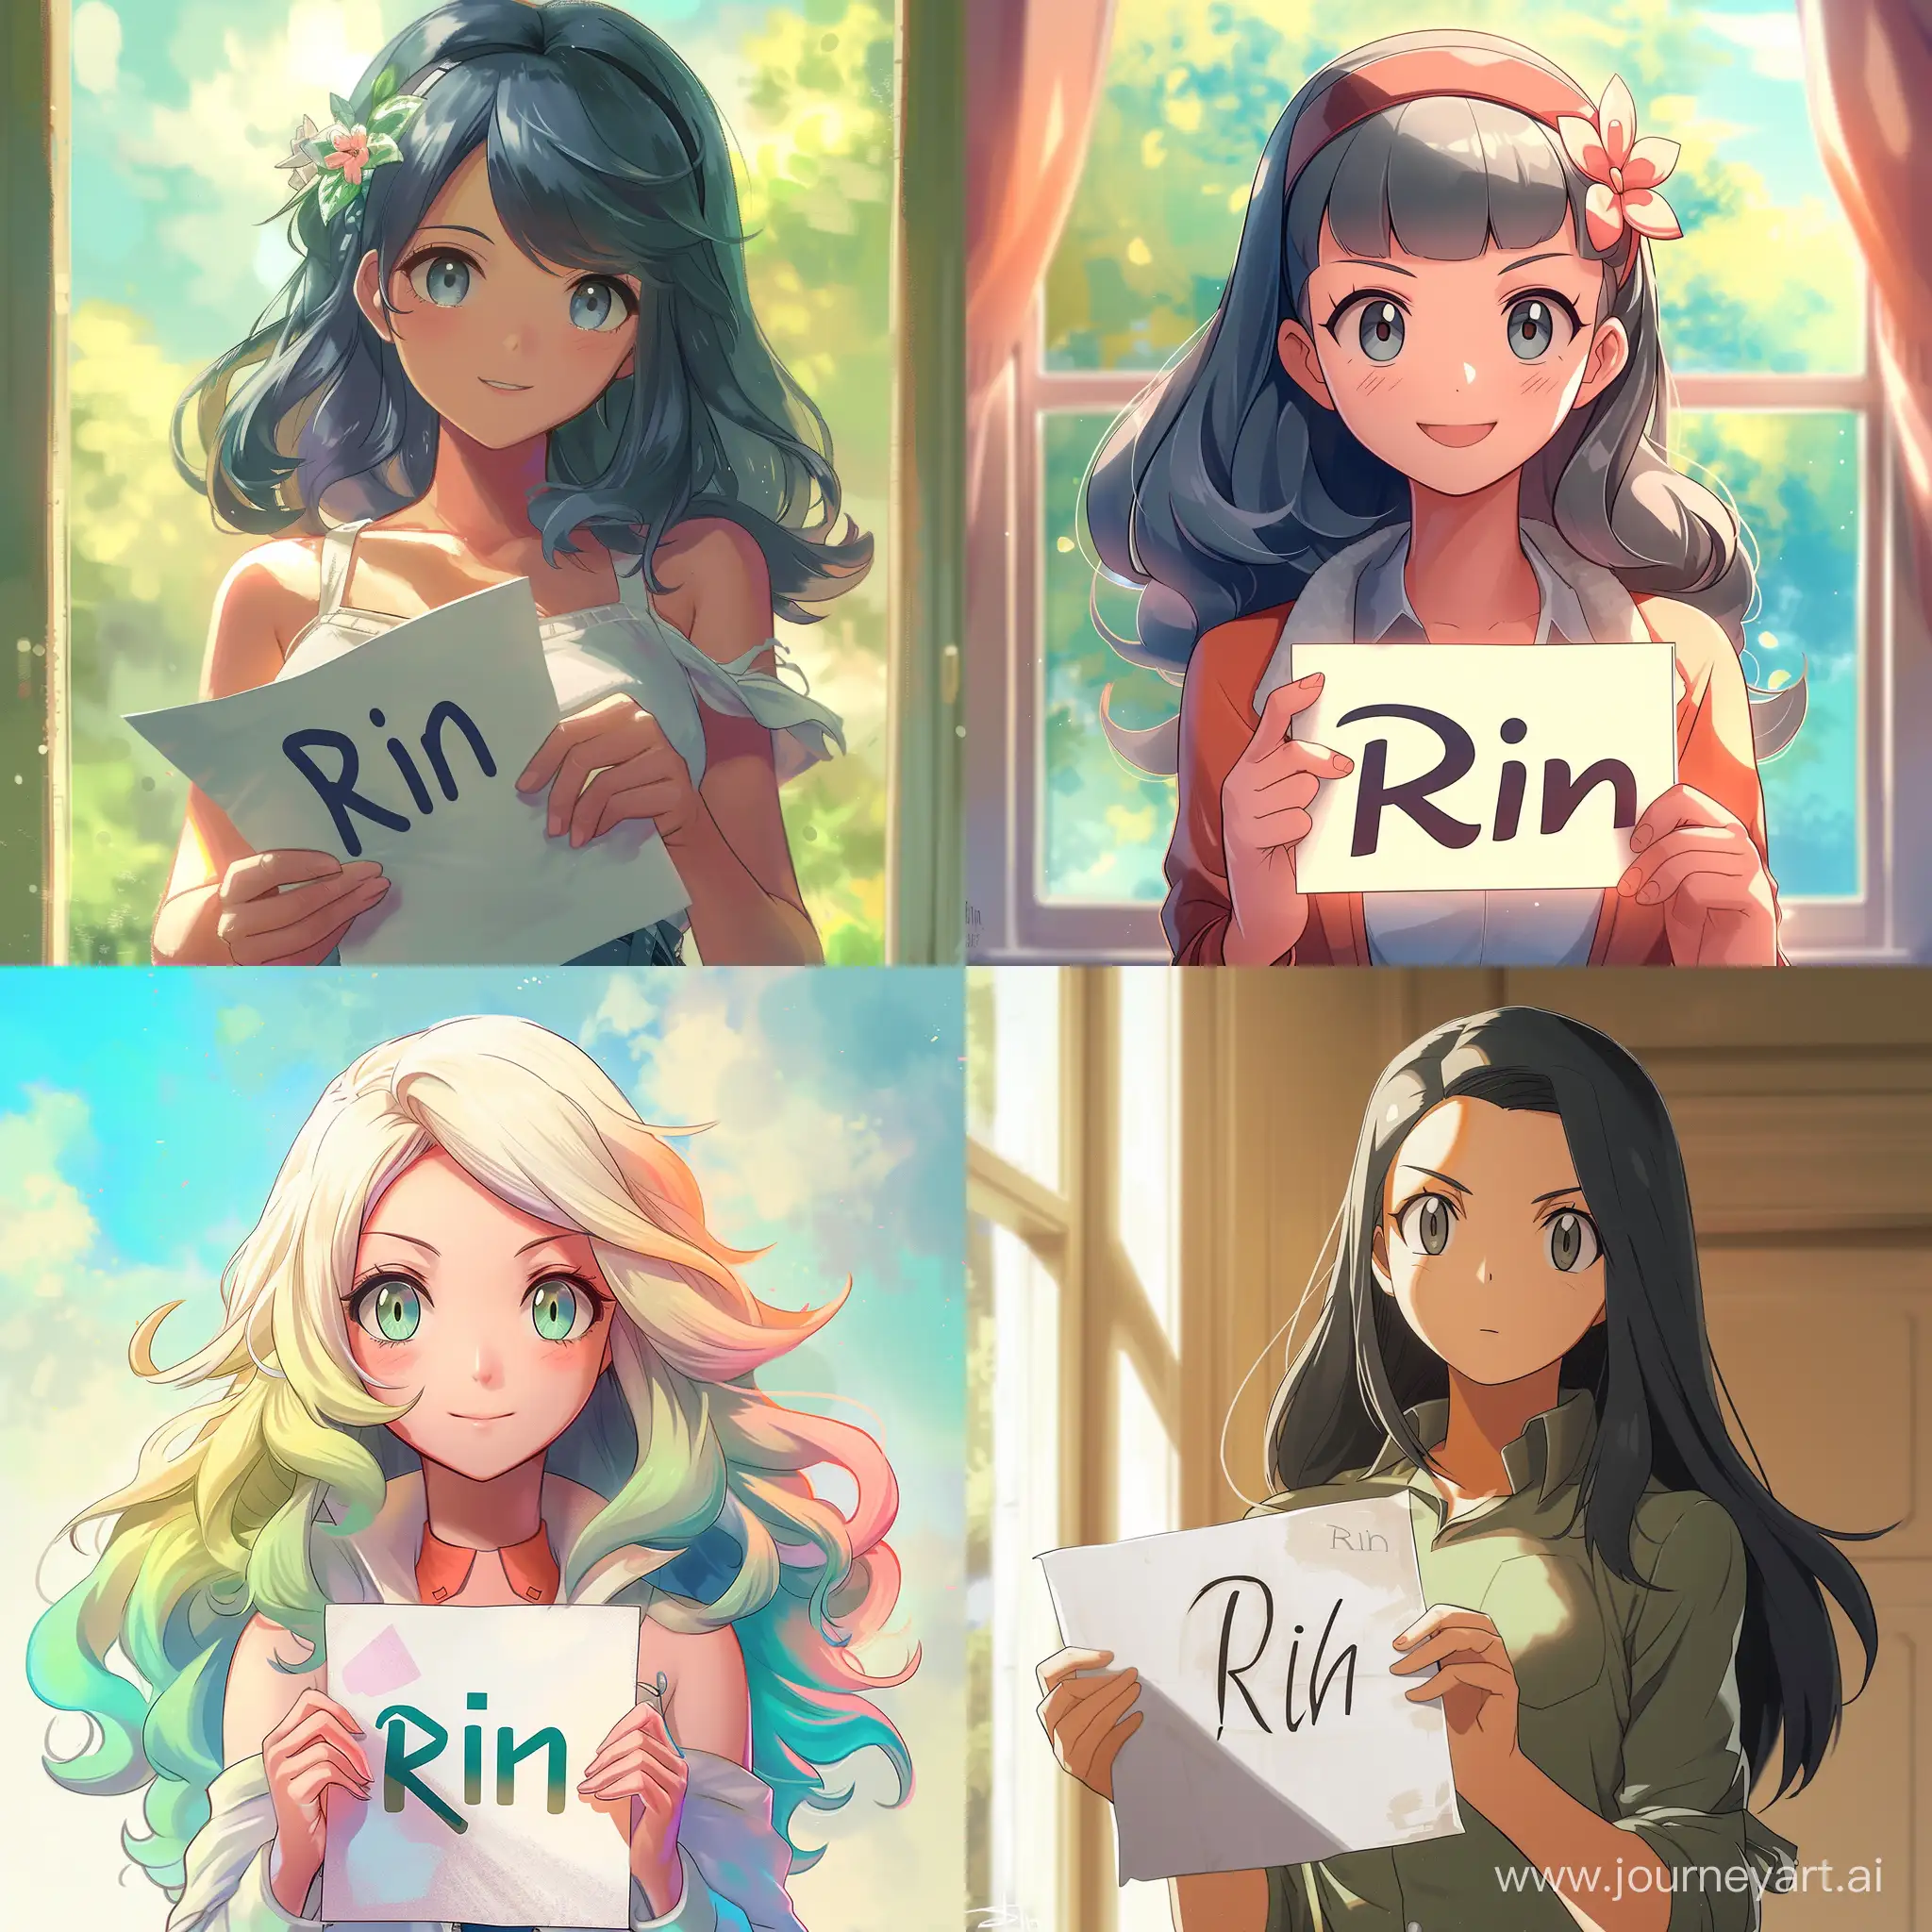 hilda from pokemon white holding a paper with the name "Rin" in front of her, with soft colors